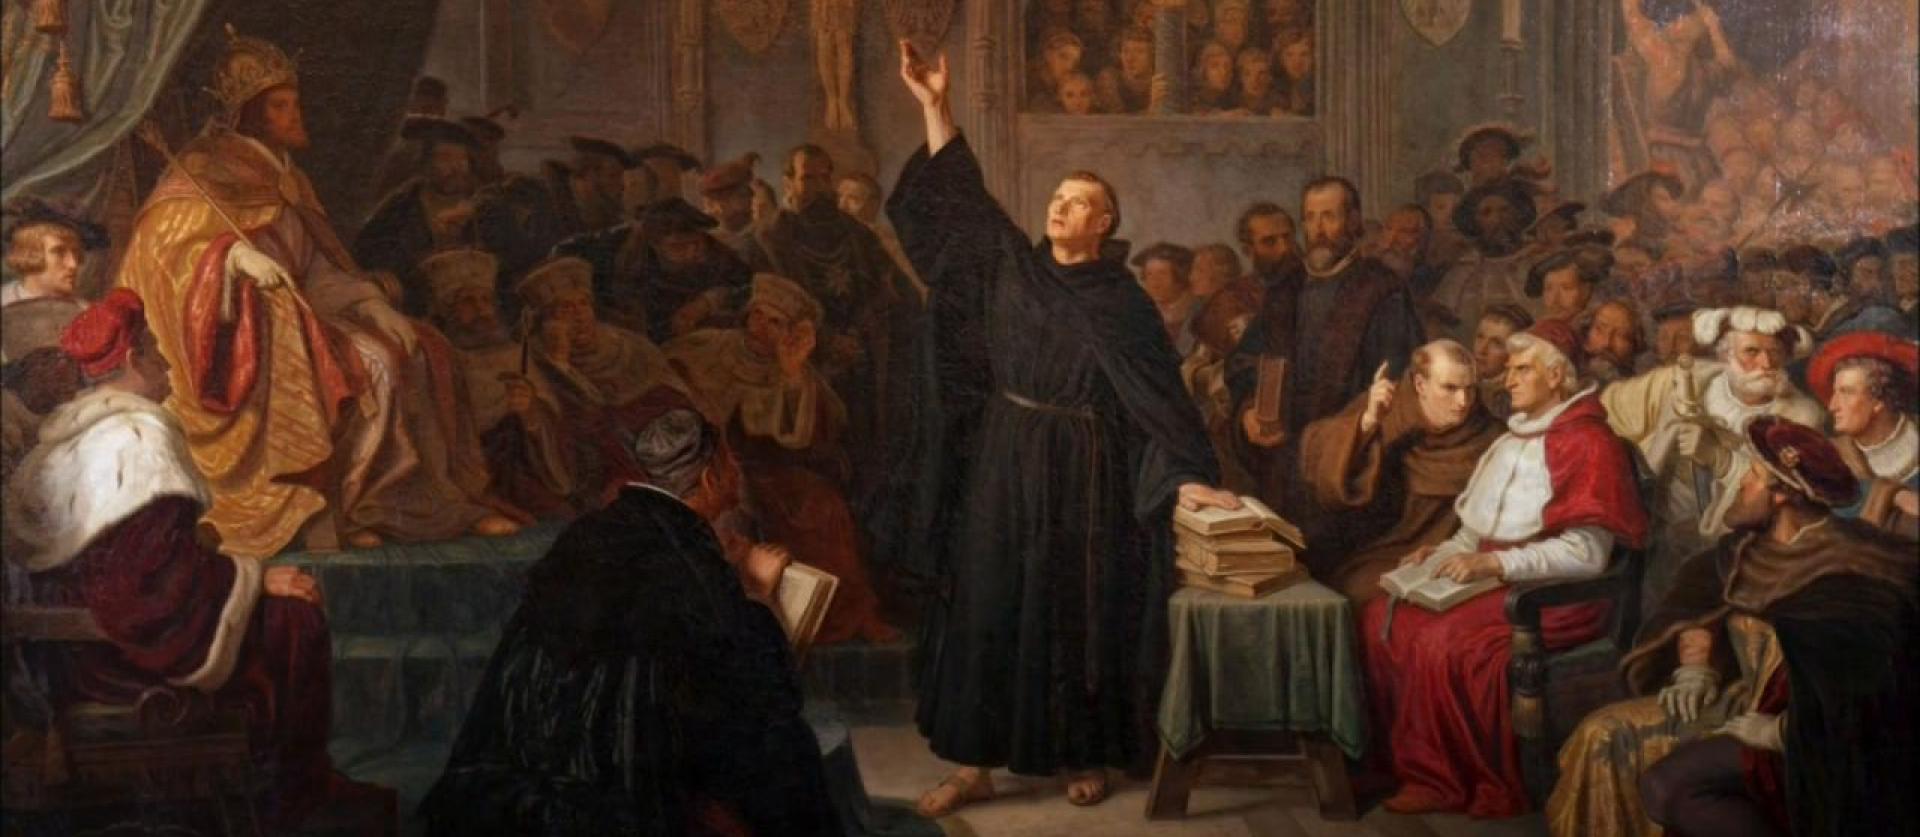 critical thinking activity the spread of the protestant reformation